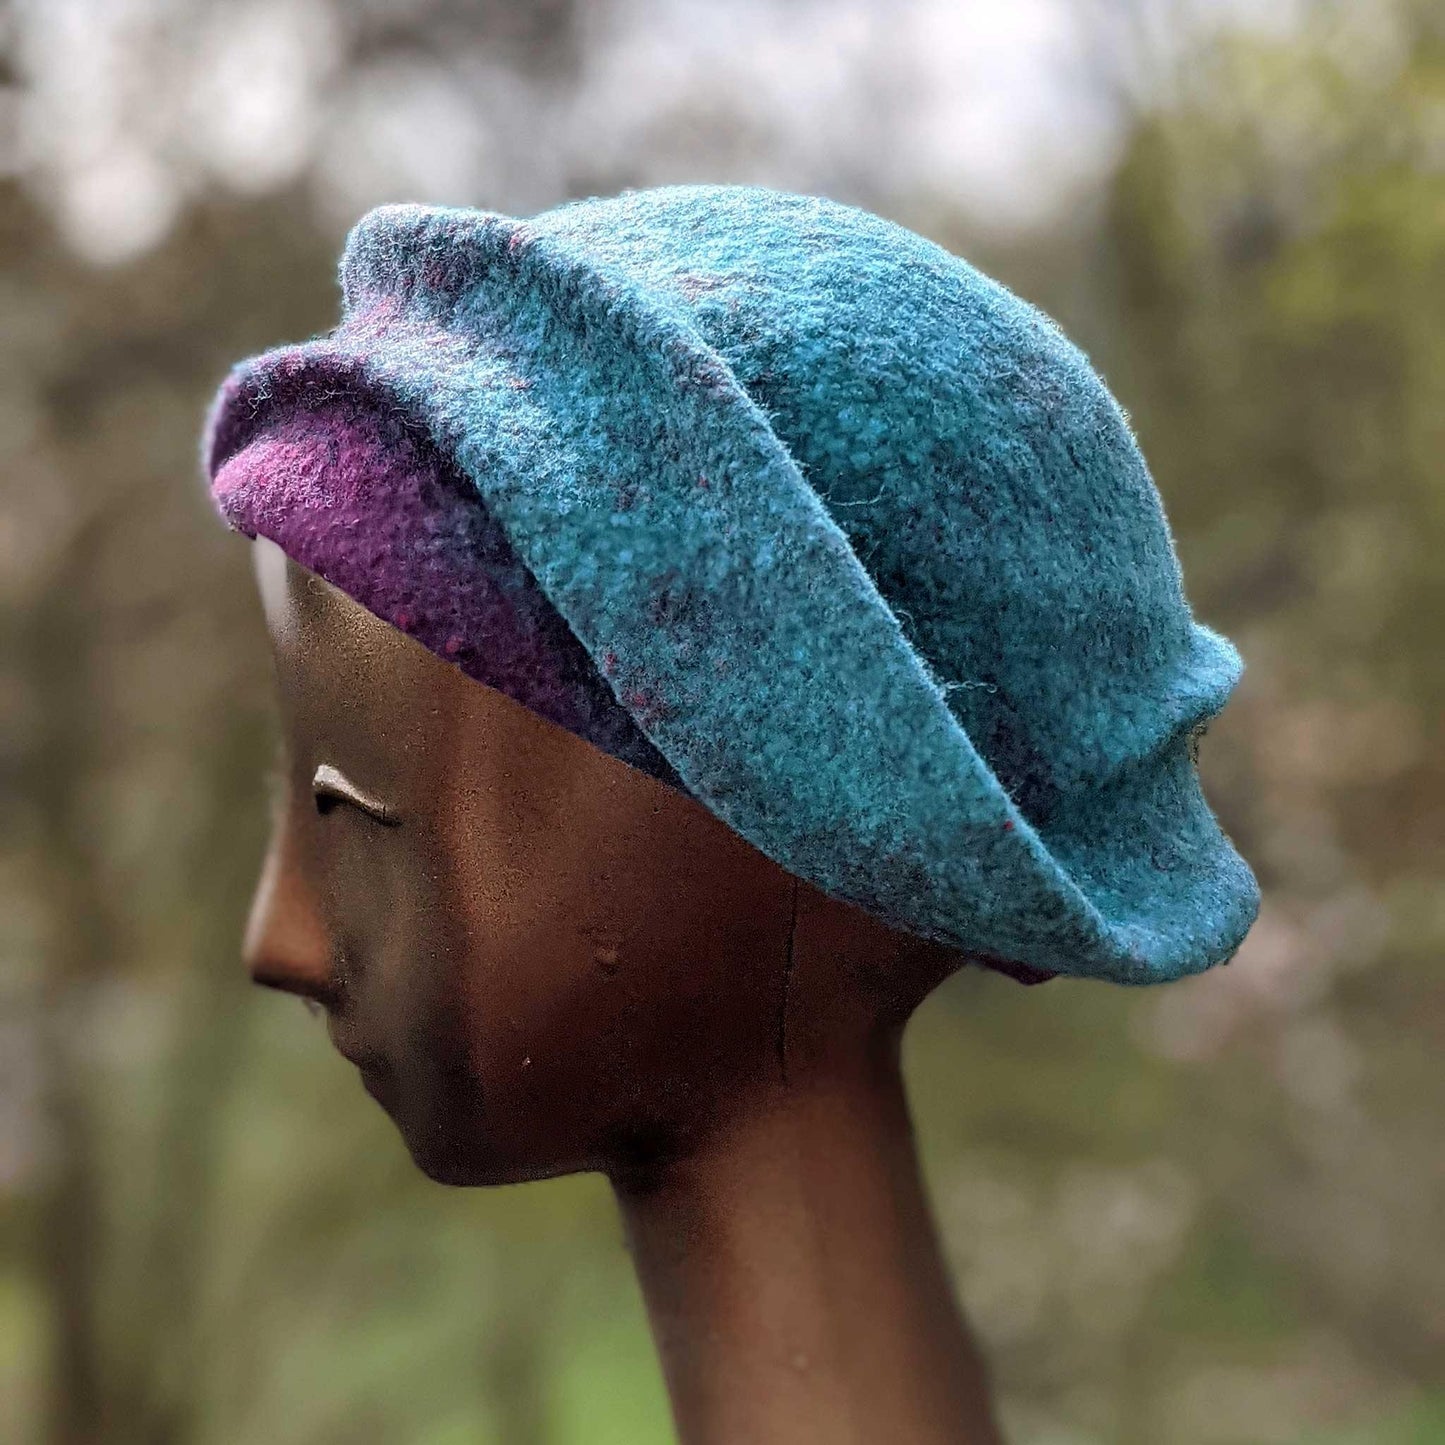 Undulating Spiral Hat in Blue-Green and Raspberry - side view